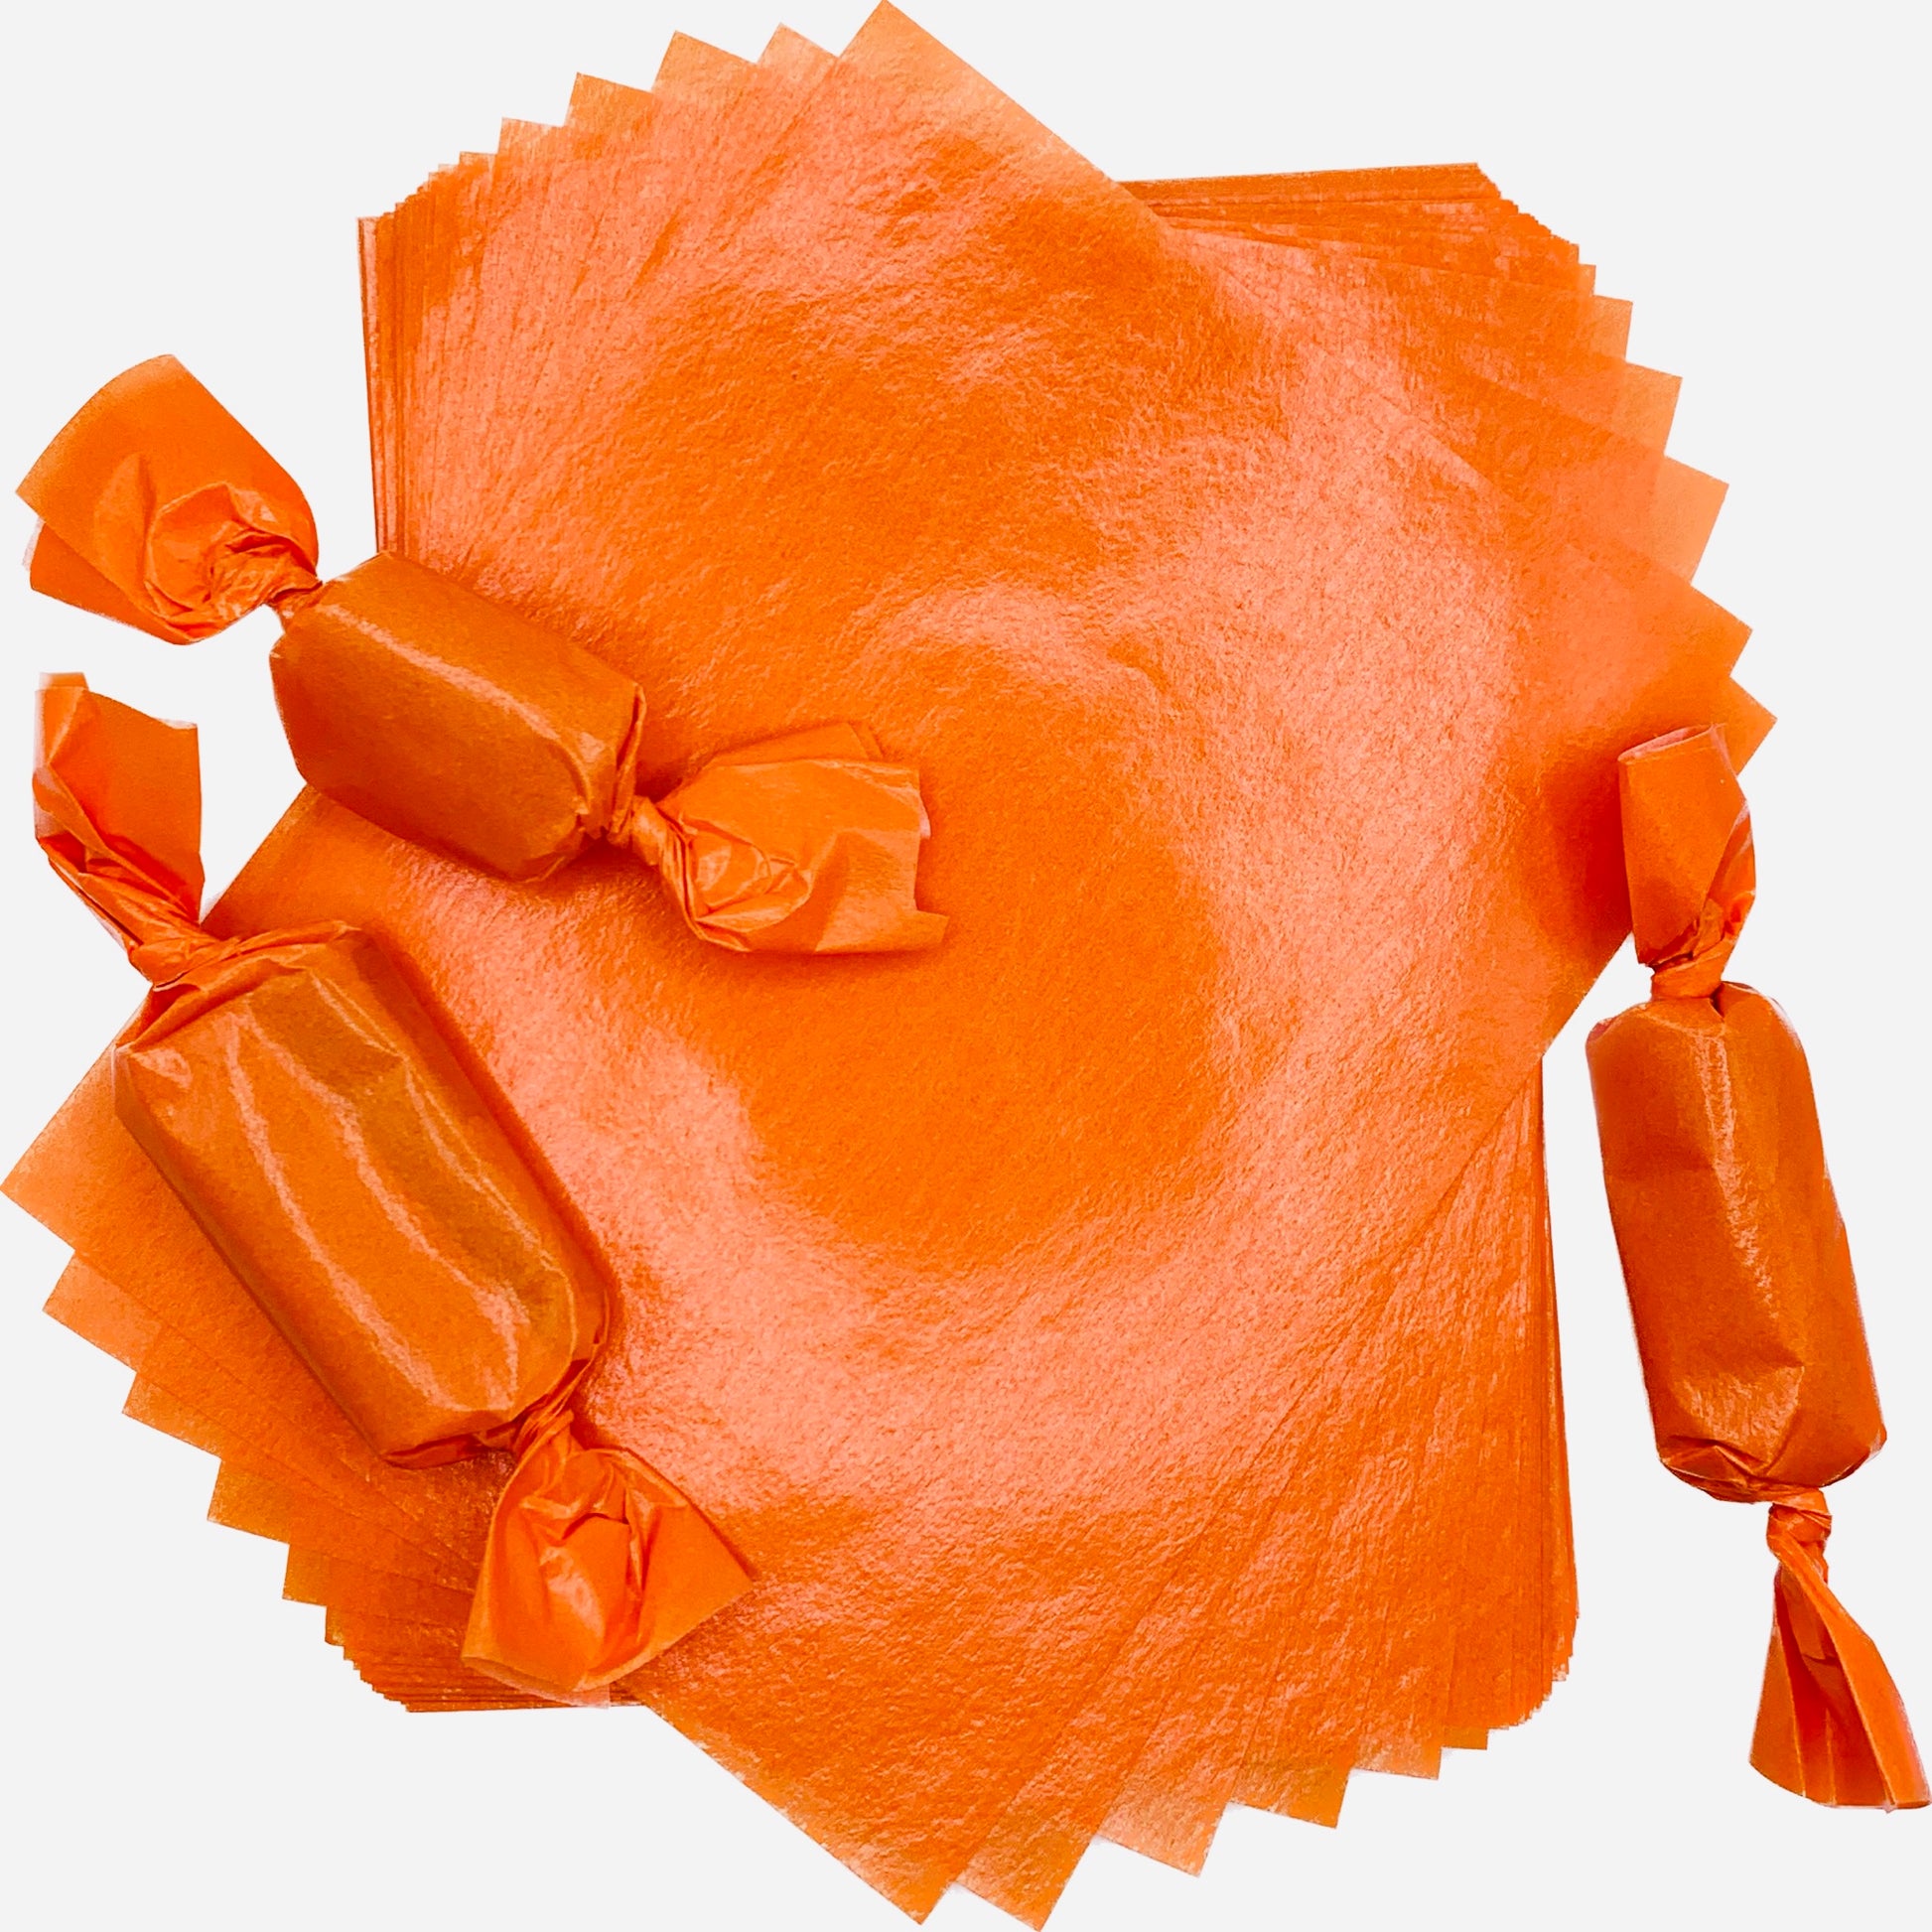 Orange Wax Caramel Candy Wrappers with Three Pieces of Wrapped Candy